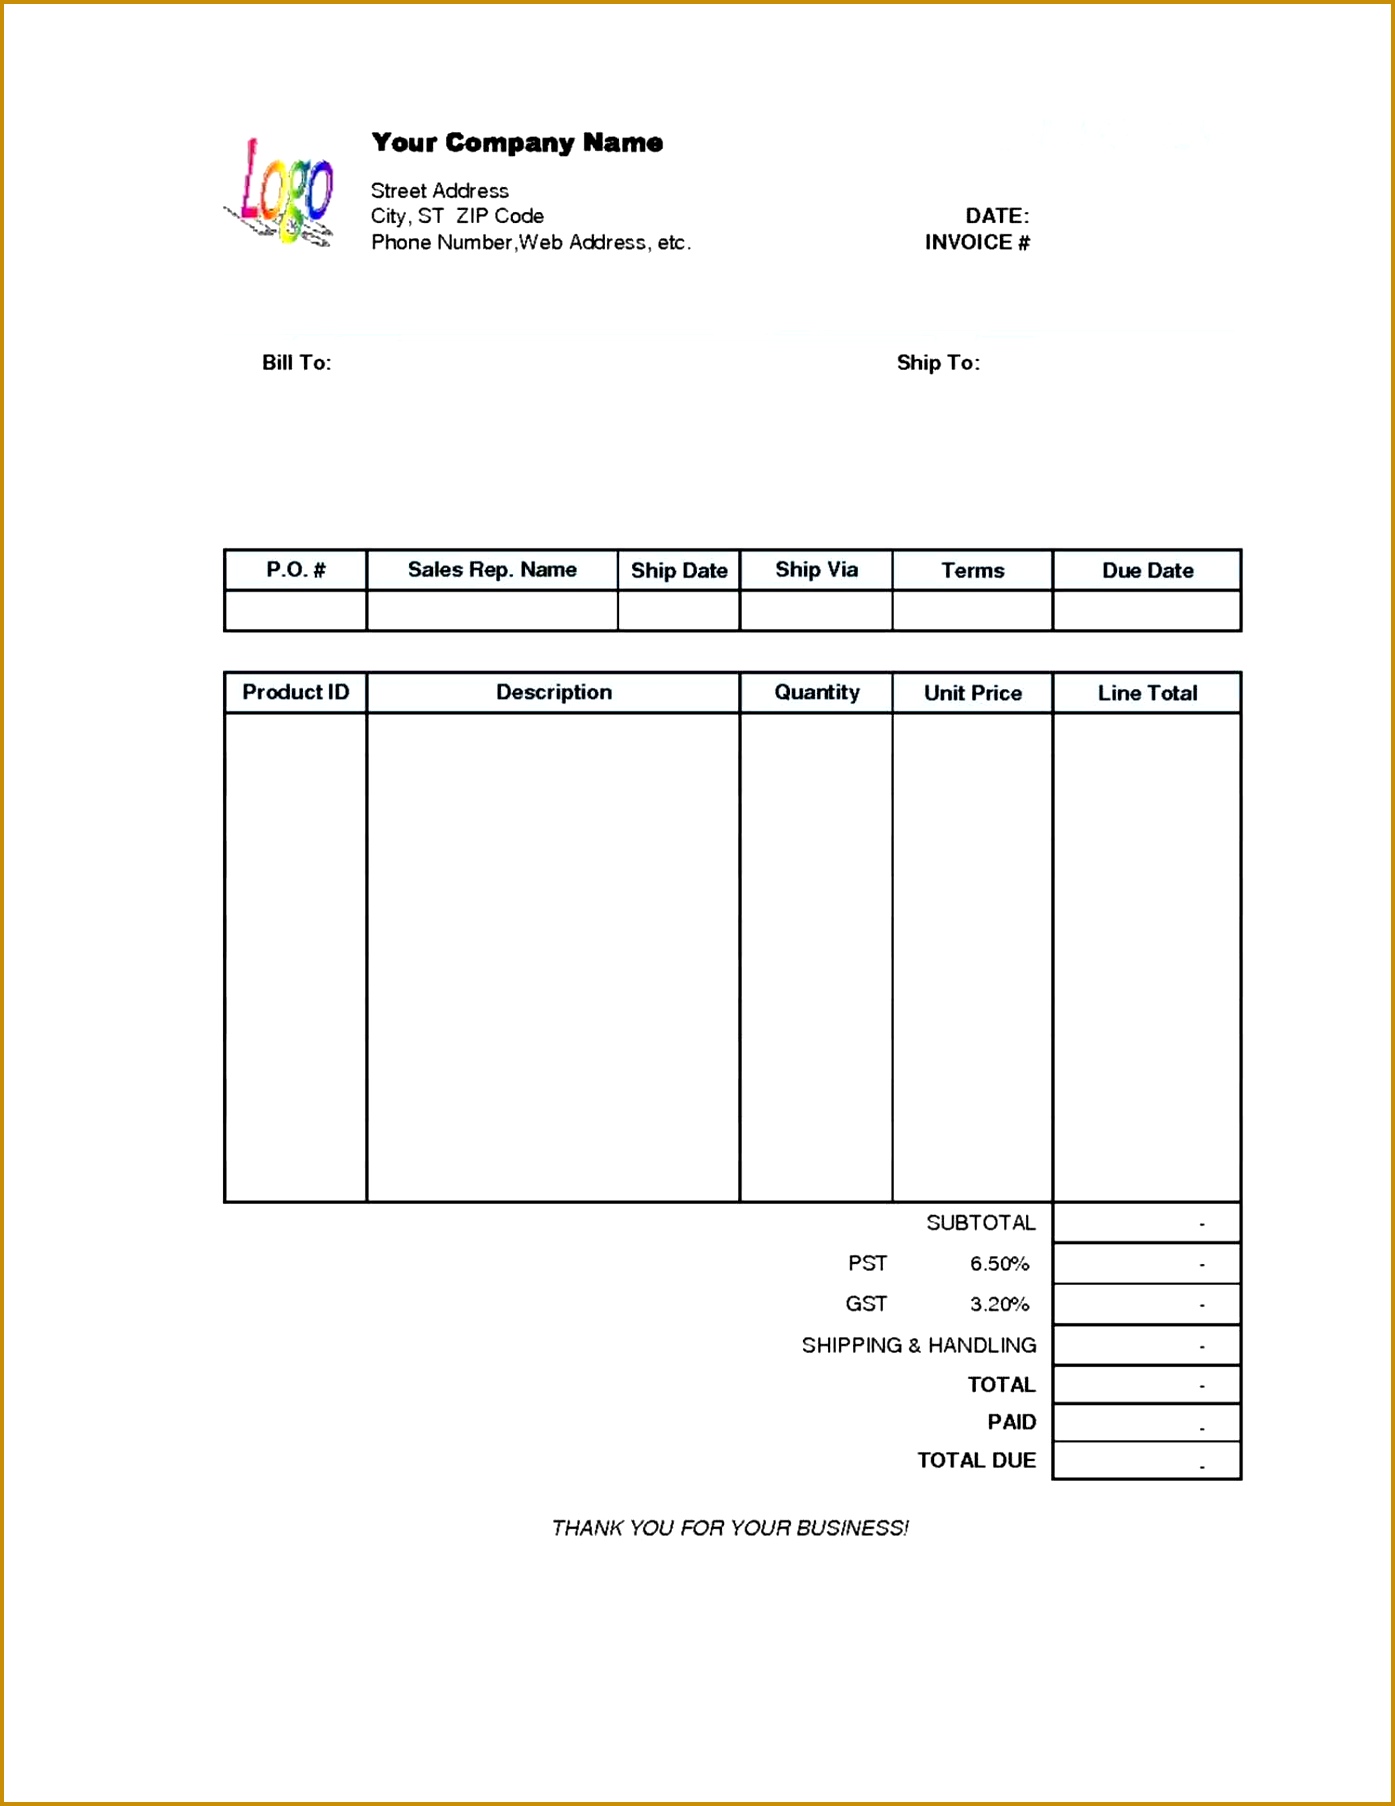 Balance Sheet Template Excel Free Download template free excel personal letter word balance sheets templates excel 18061395